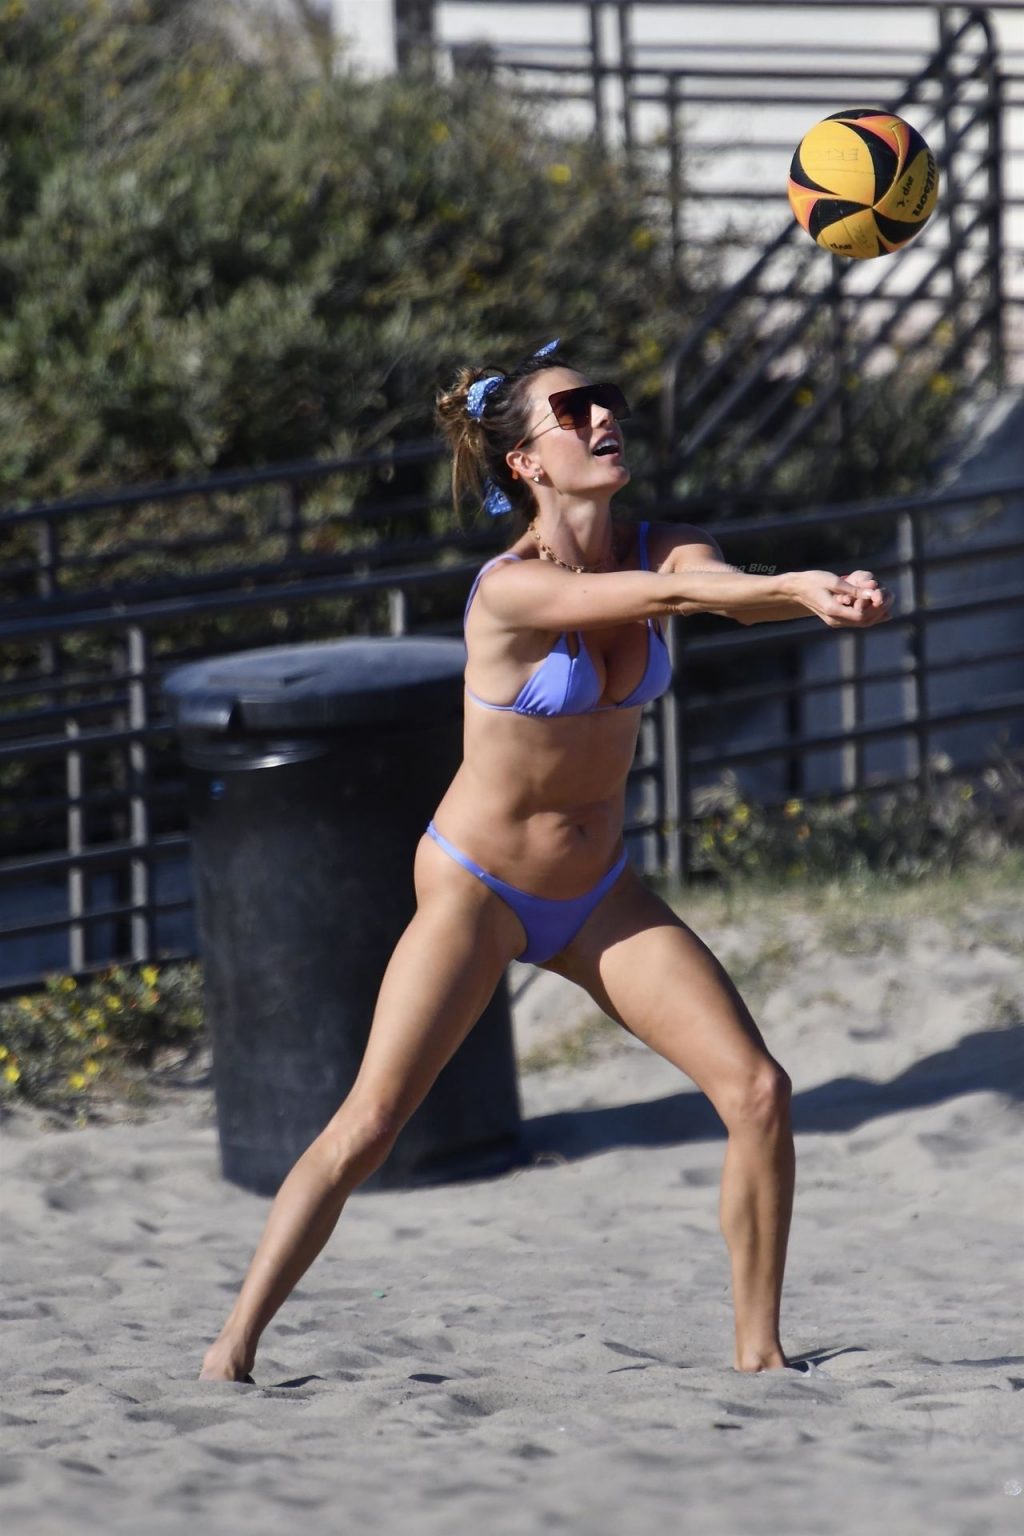 Alessandra Ambrosio Flaunts Her Pin-Up Bikini Body During Volleyball Practice (104 Photos)